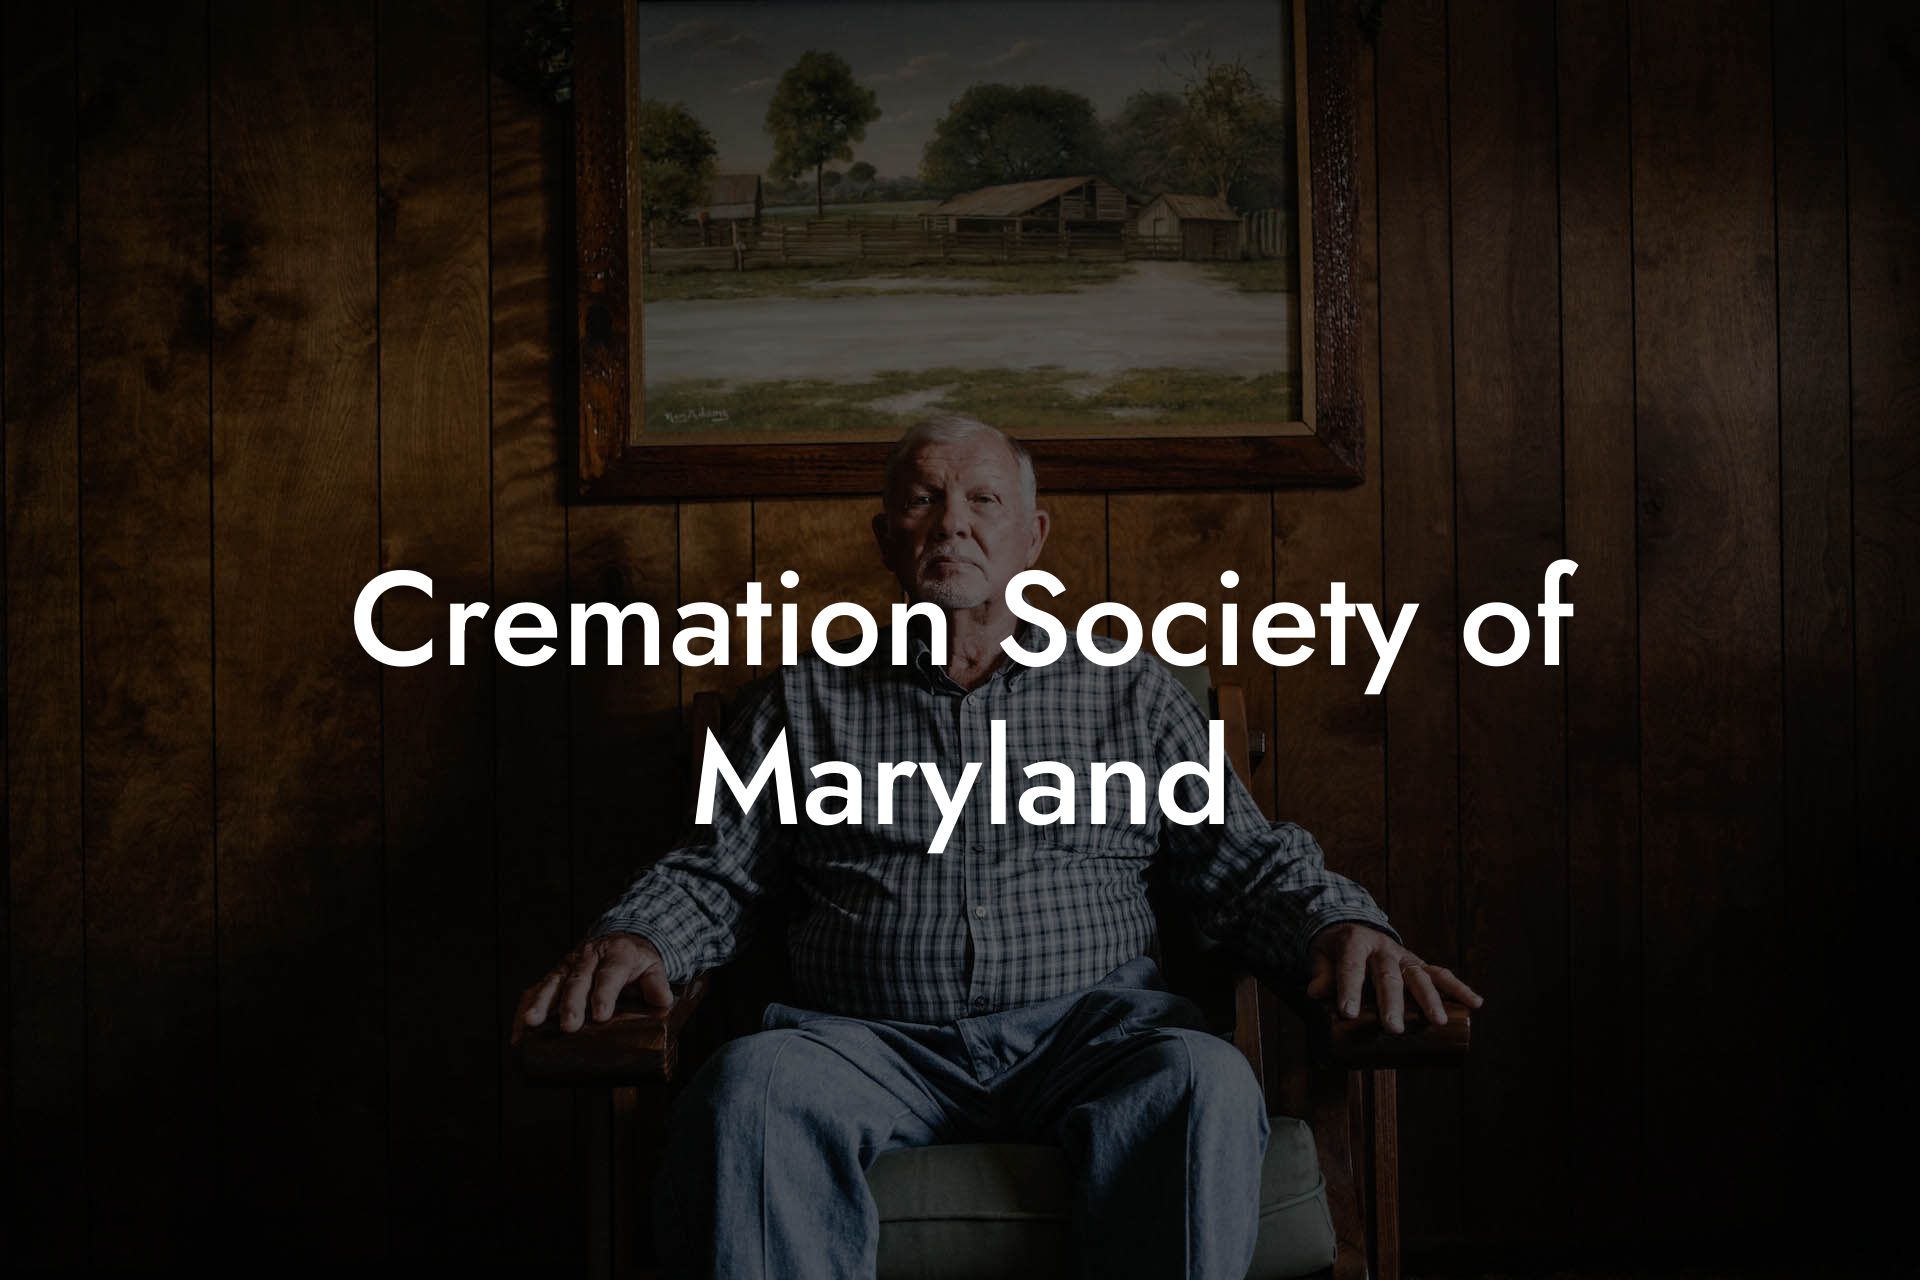 Cremation Society of Maryland